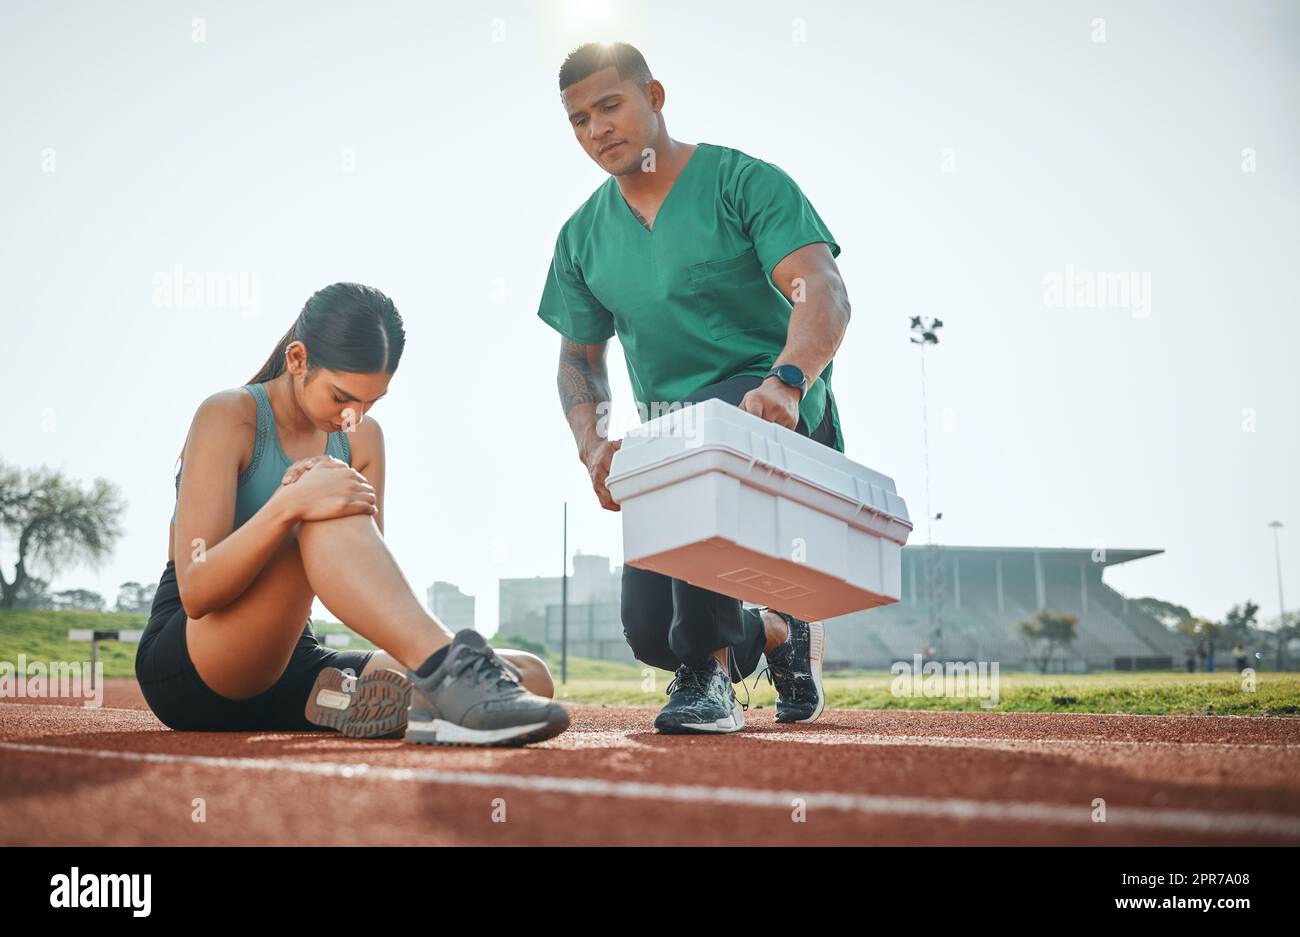 Rushing to the scene for medical attention. a sports paramedic providing first aid to an athlete on a running track. Stock Photo